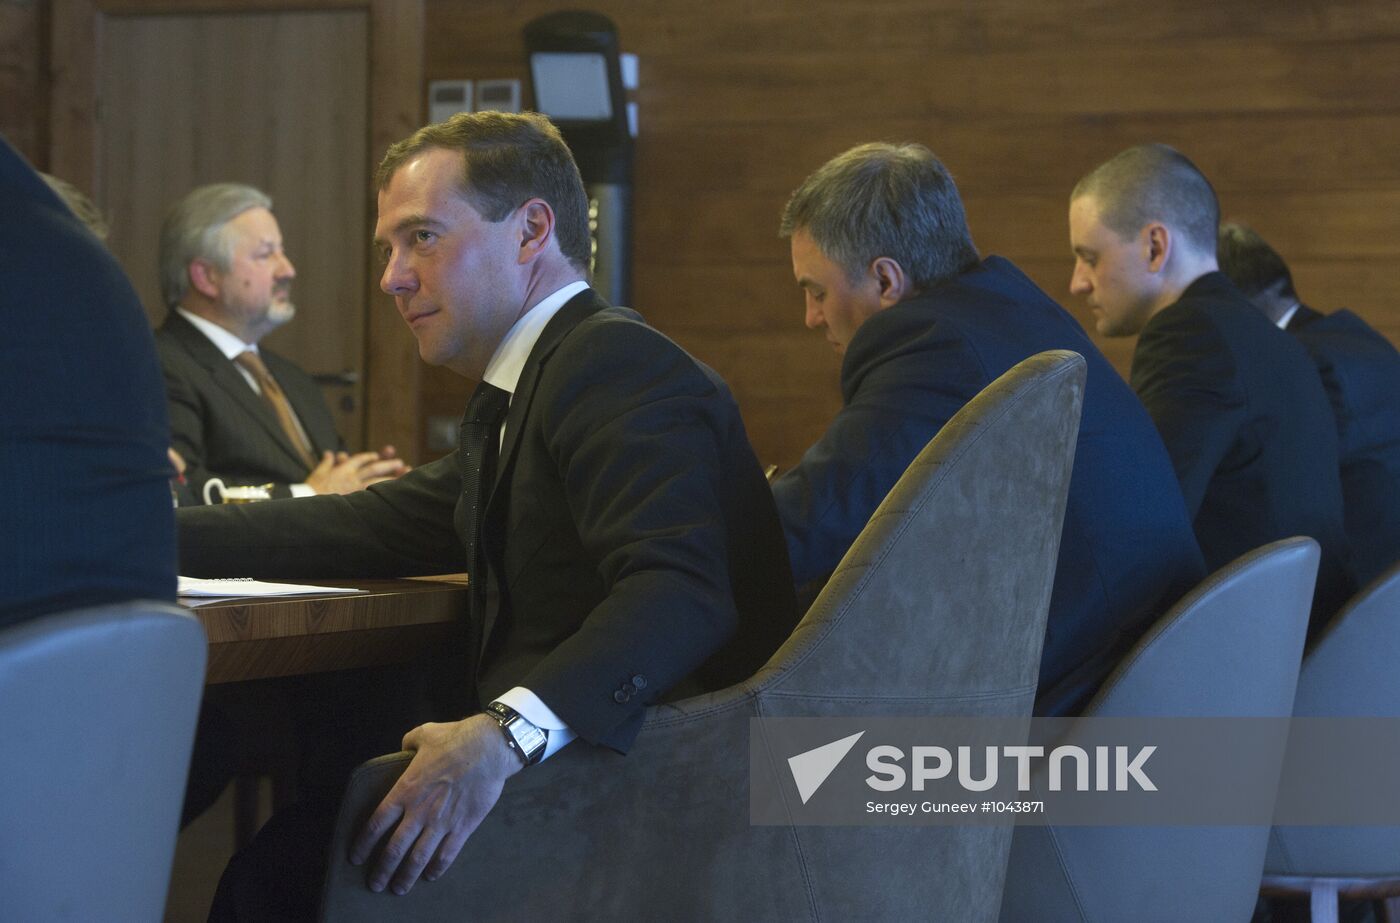 Dmitry Medvedev meets with leaders of non-registered parties